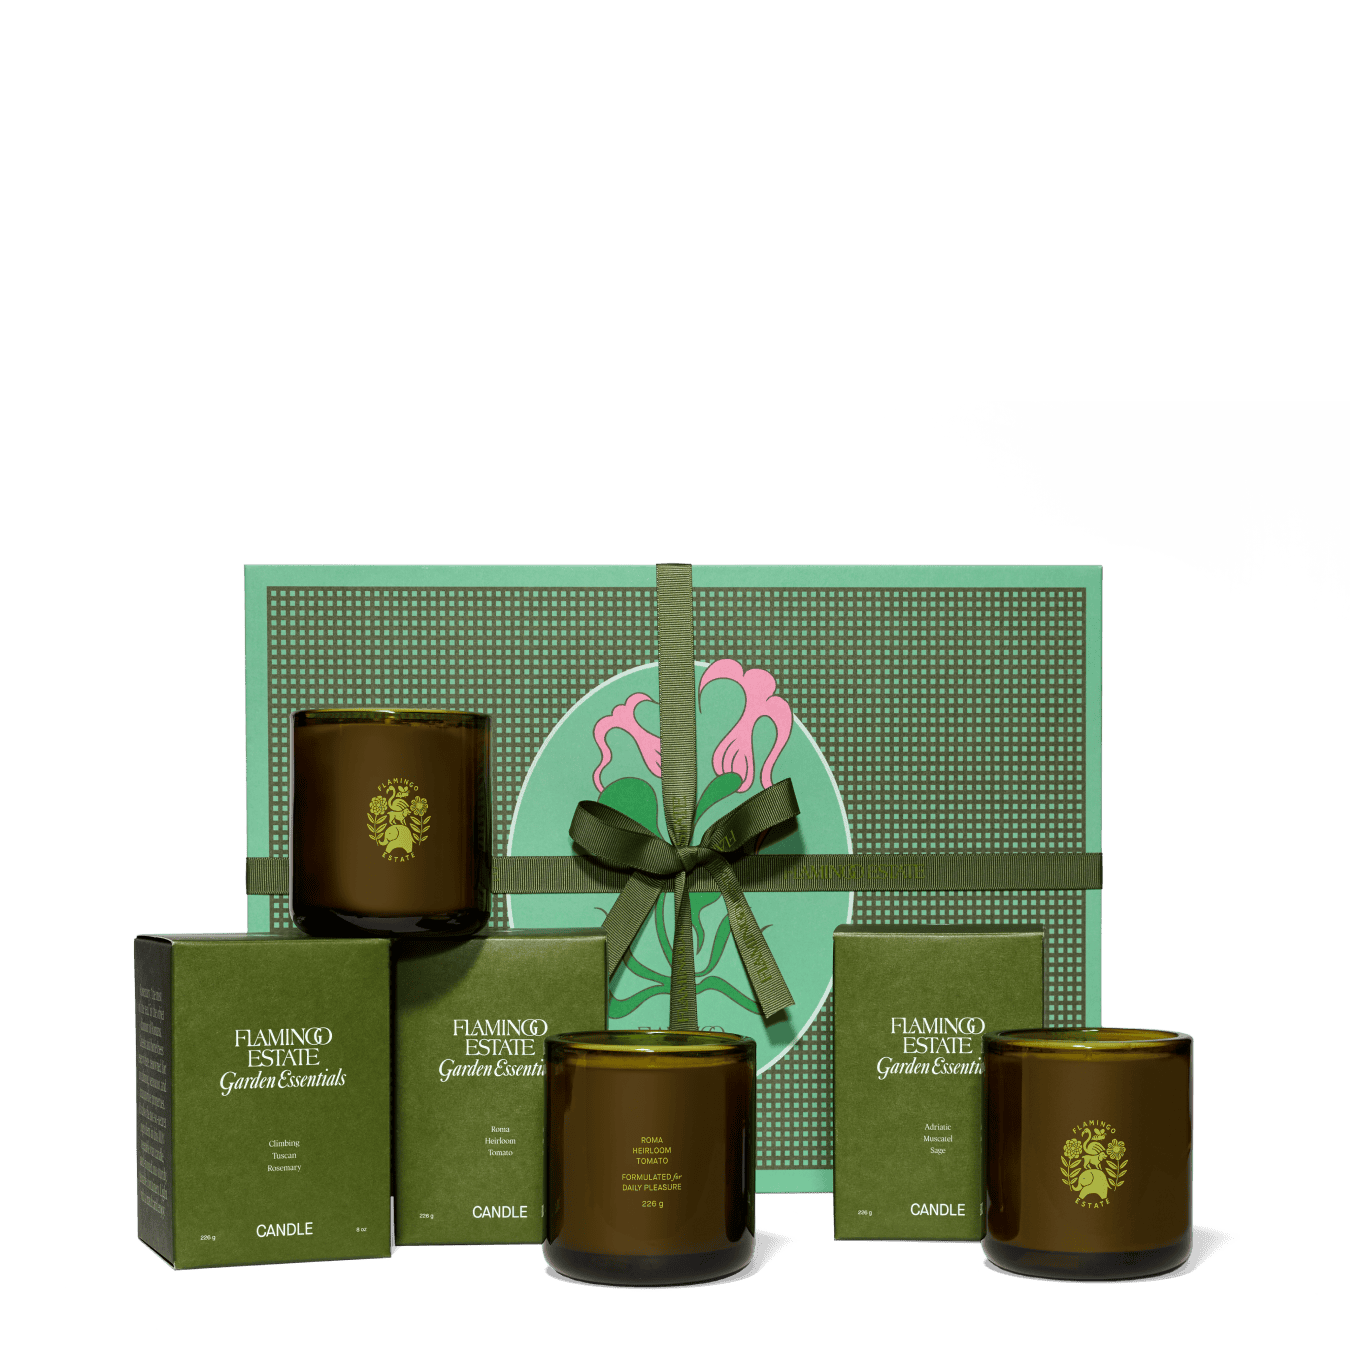 Three Flamingo Estate Garden Essentials Candles And Packaging Displayed In Front Of A Green Gift Set Box